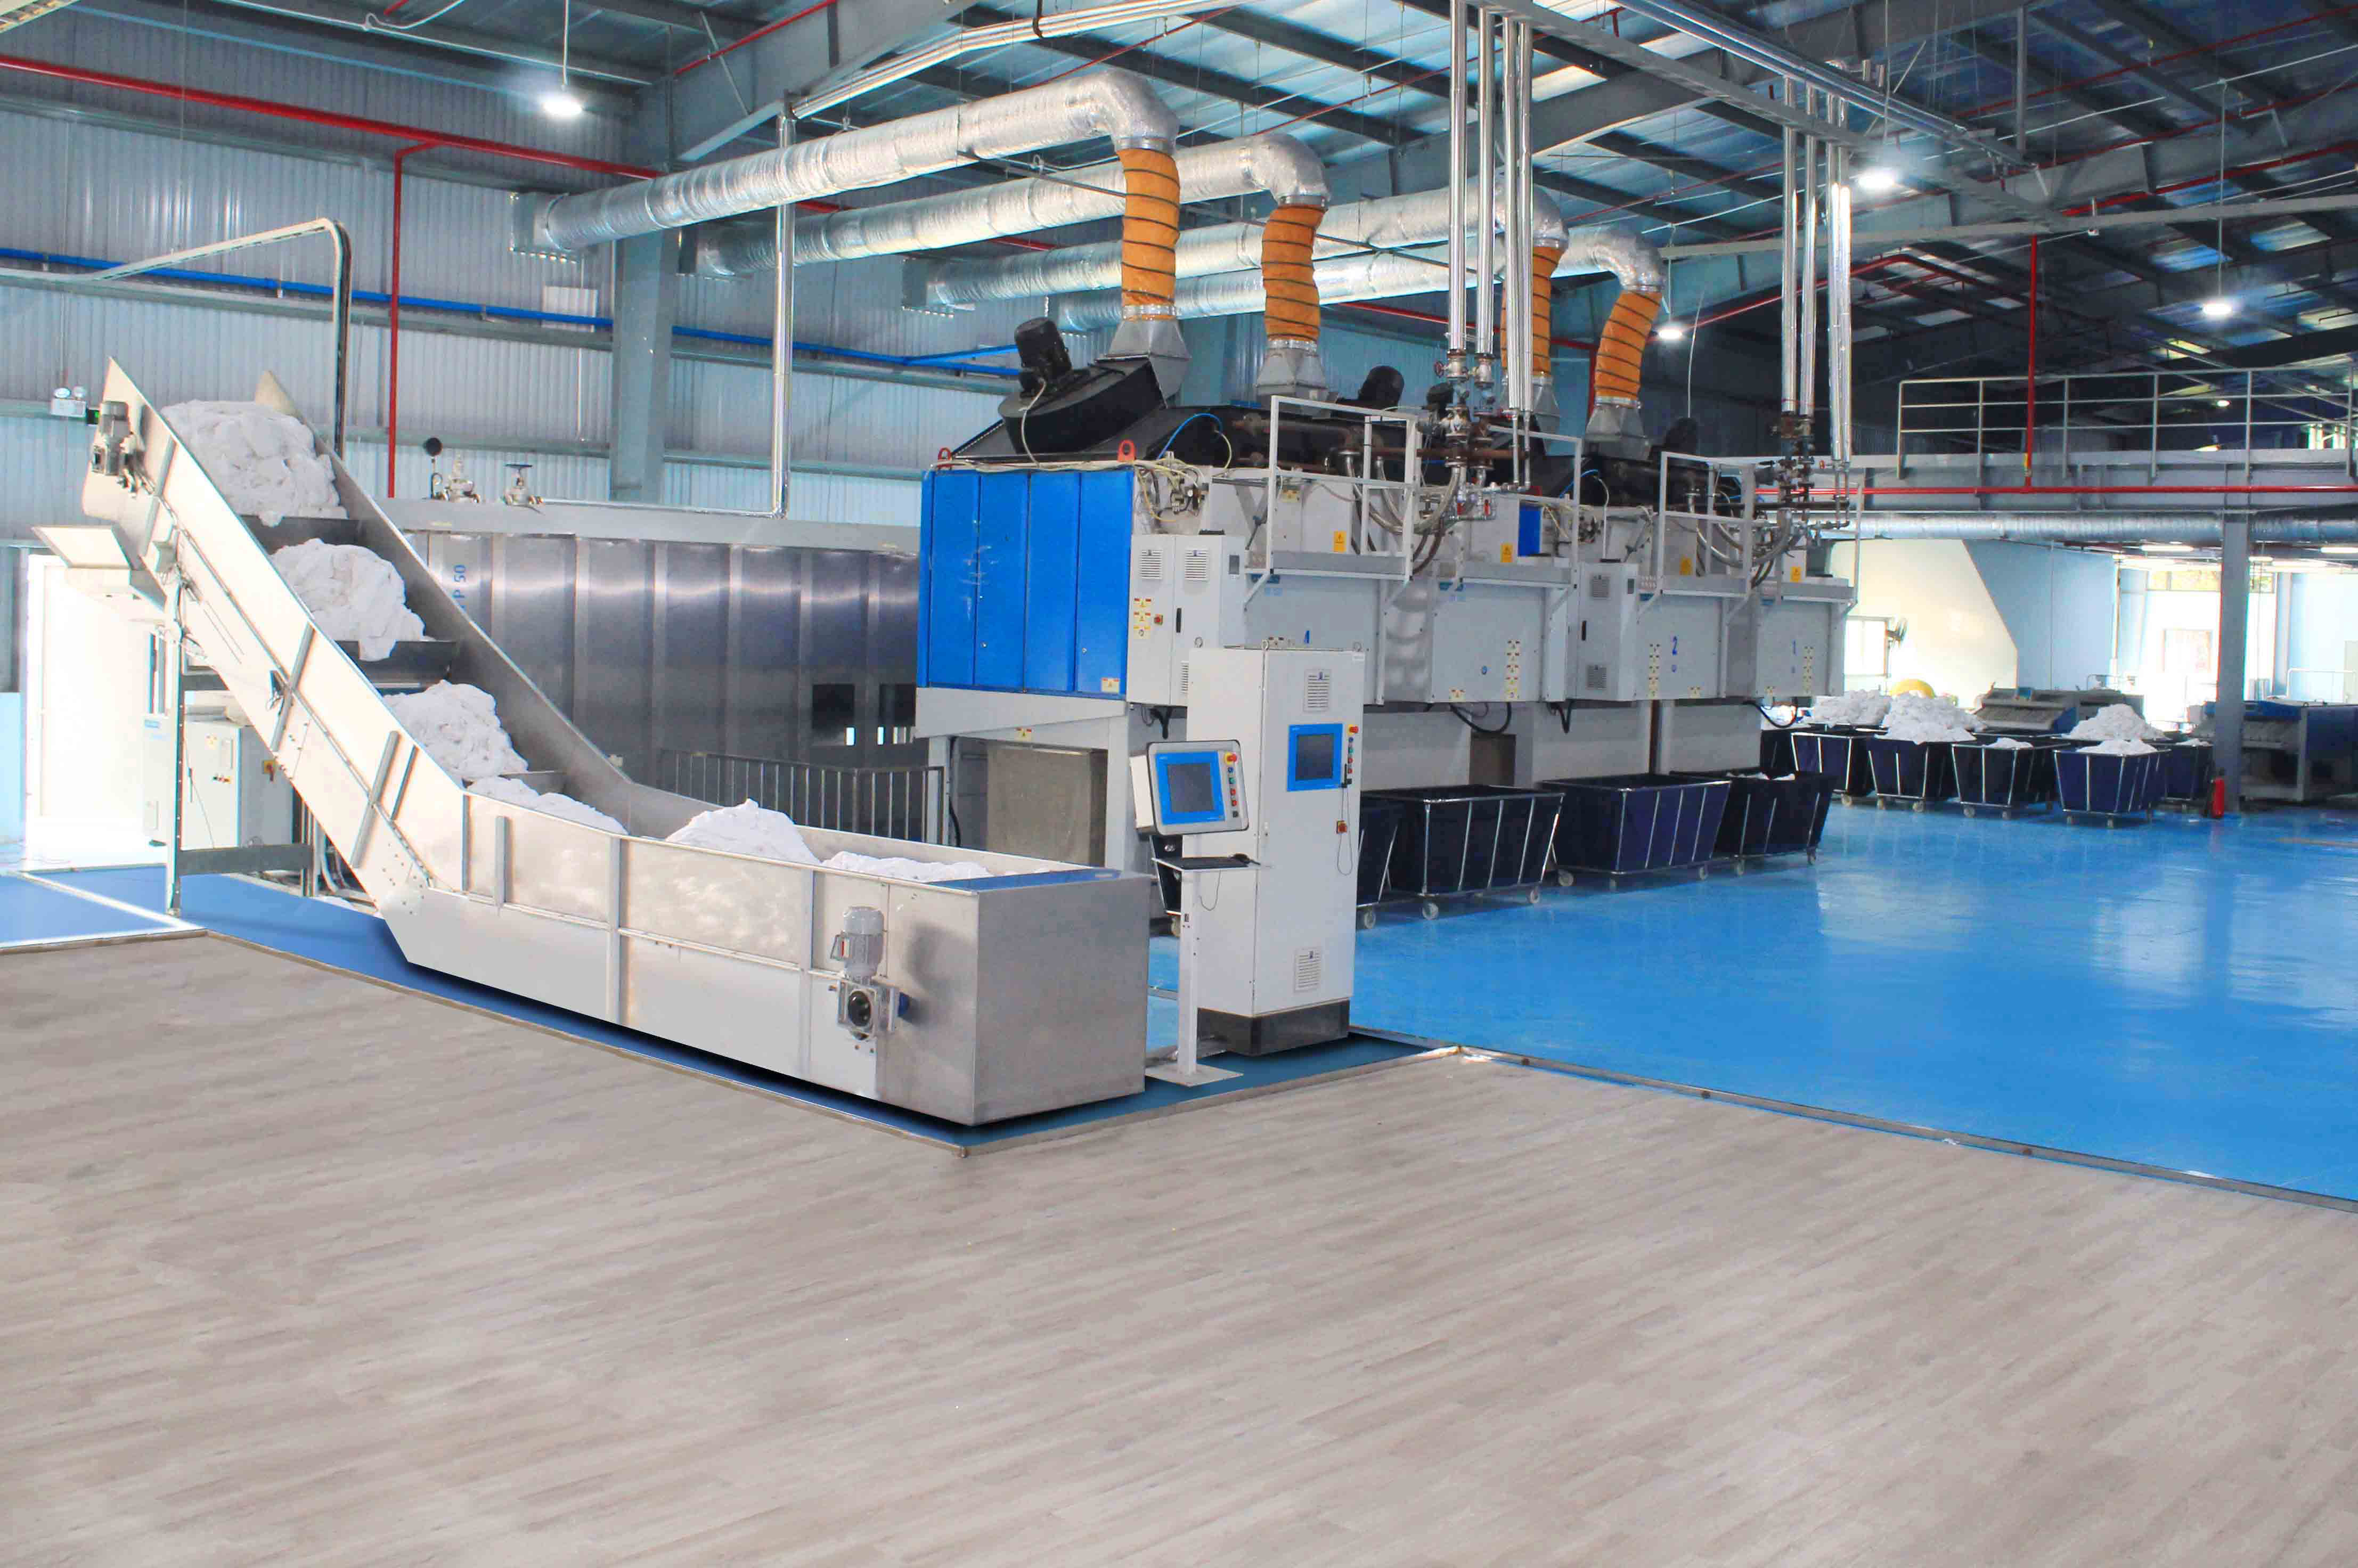 Tunnel washing machine system with a capacity of 1.2 tons/hour